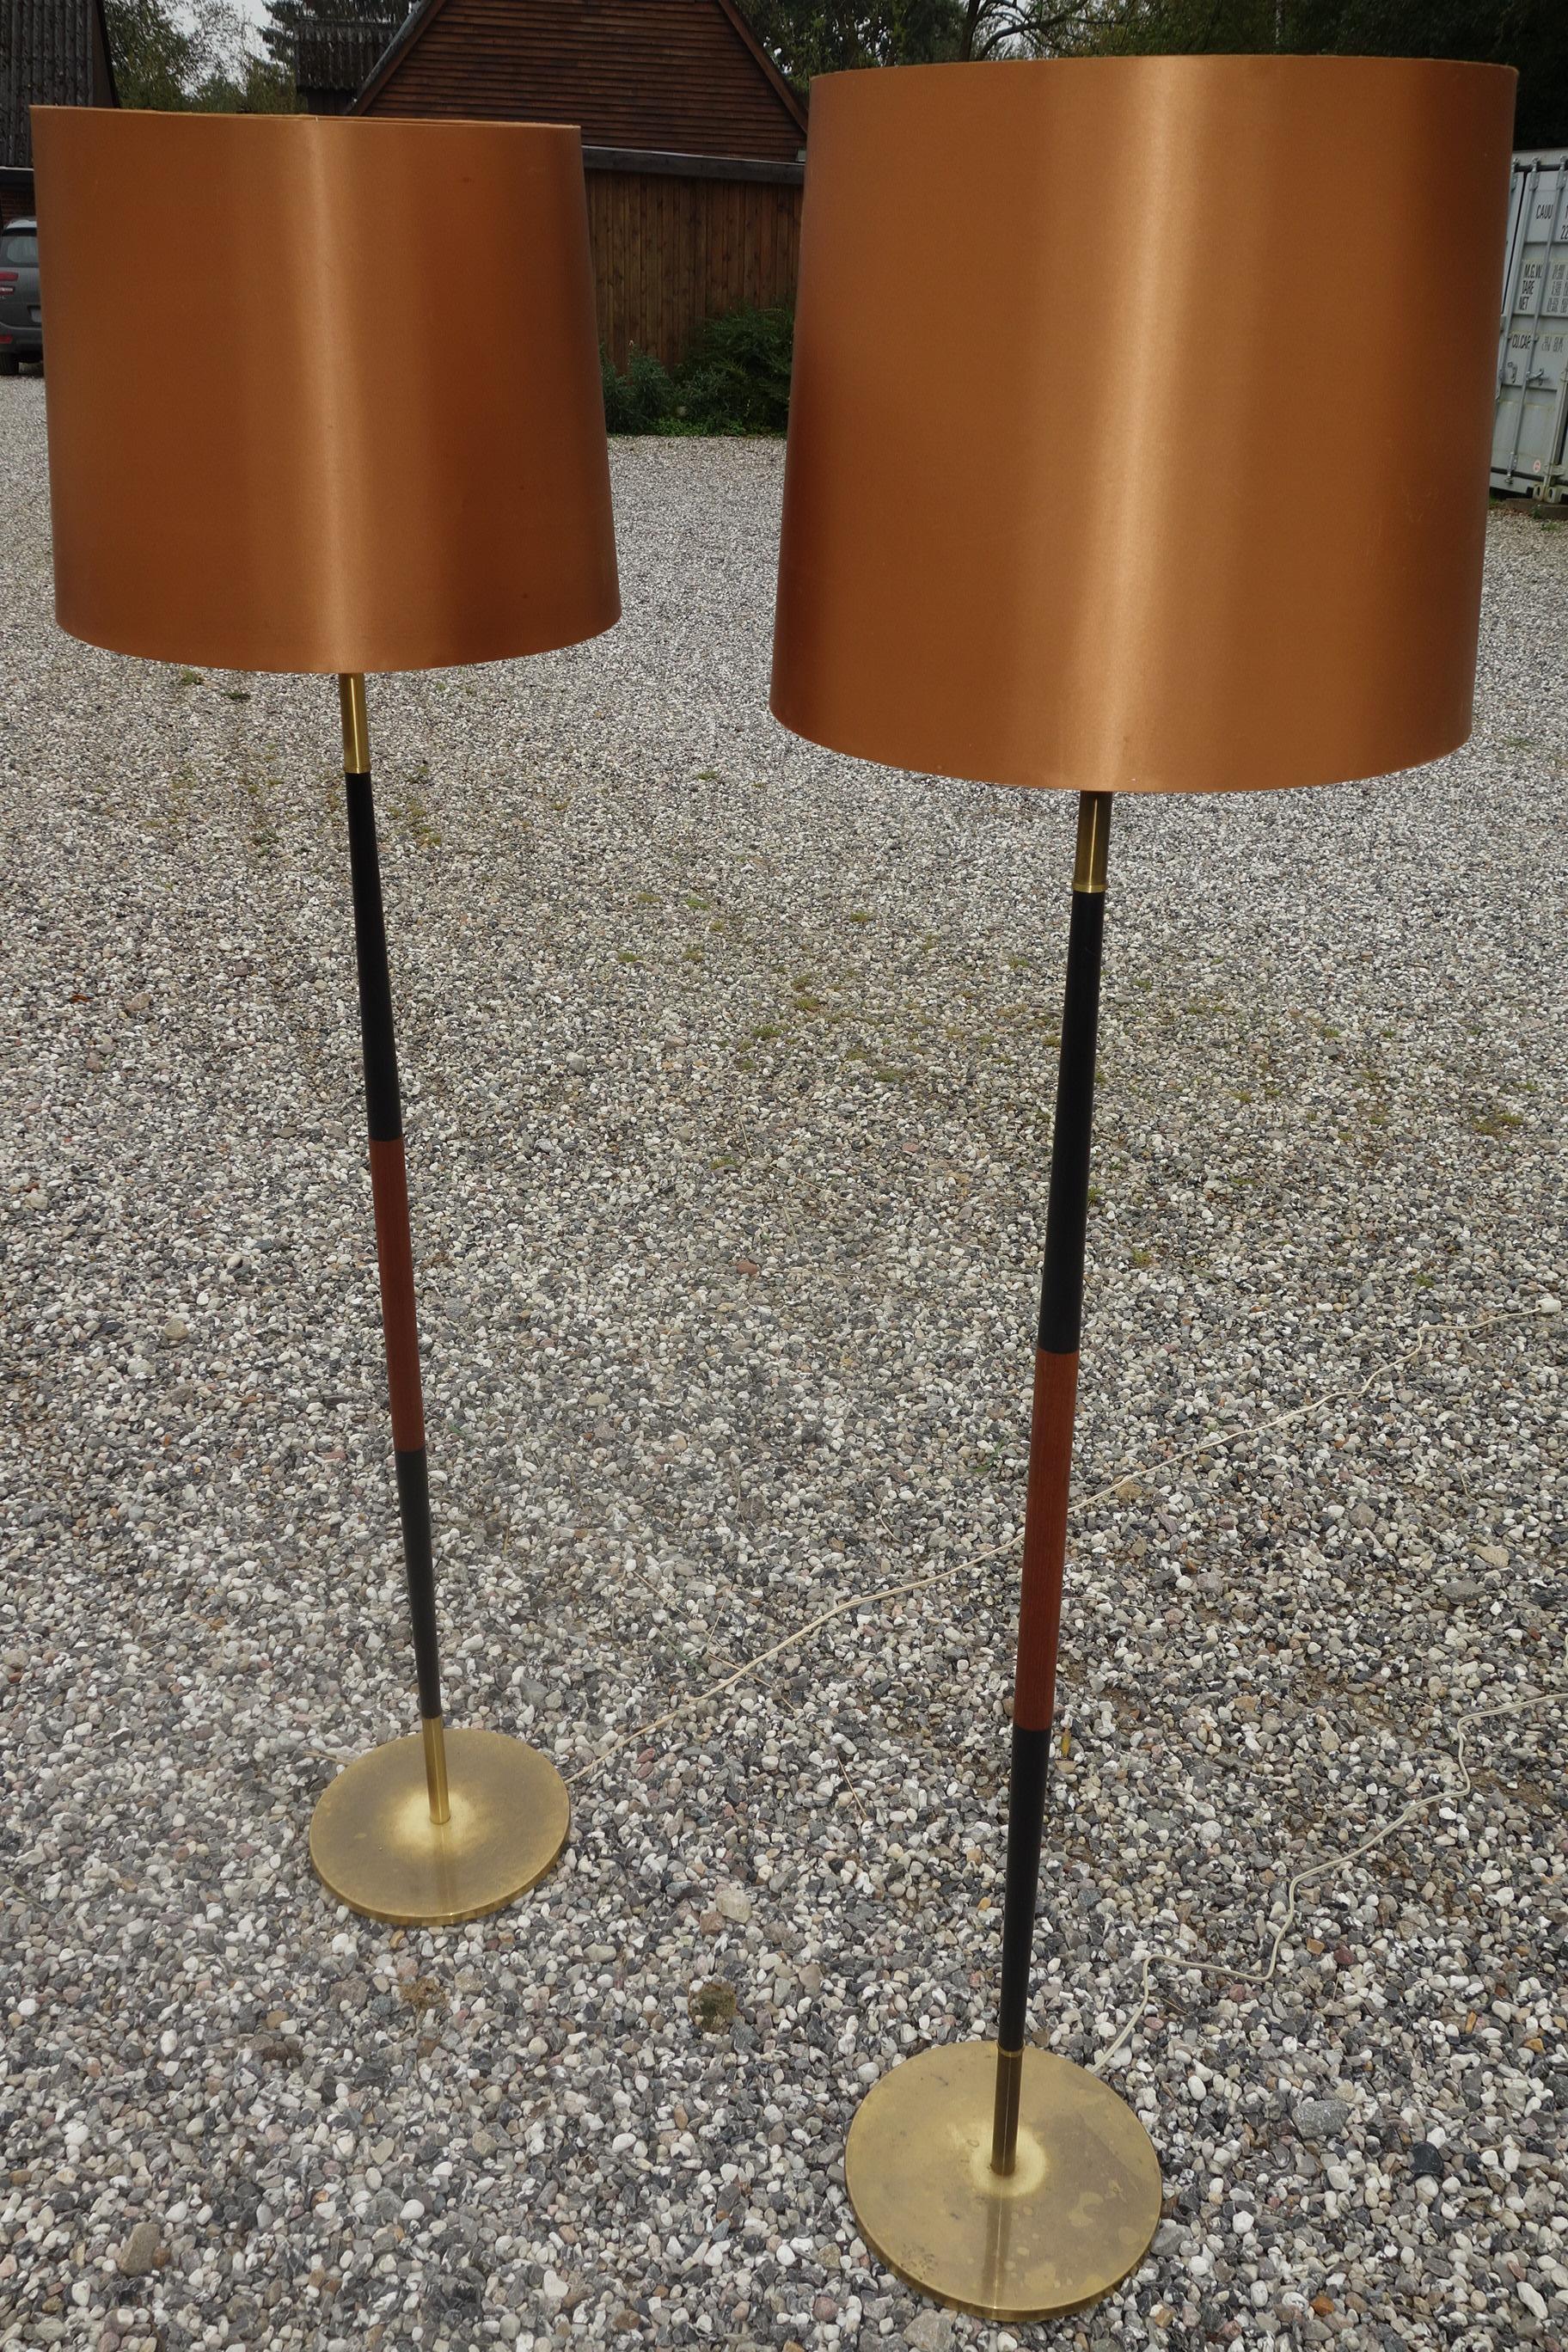 Danish Design a Pair of Floor Lamps, Brass, Teak and Black Lacquered Metal 1960 For Sale 4